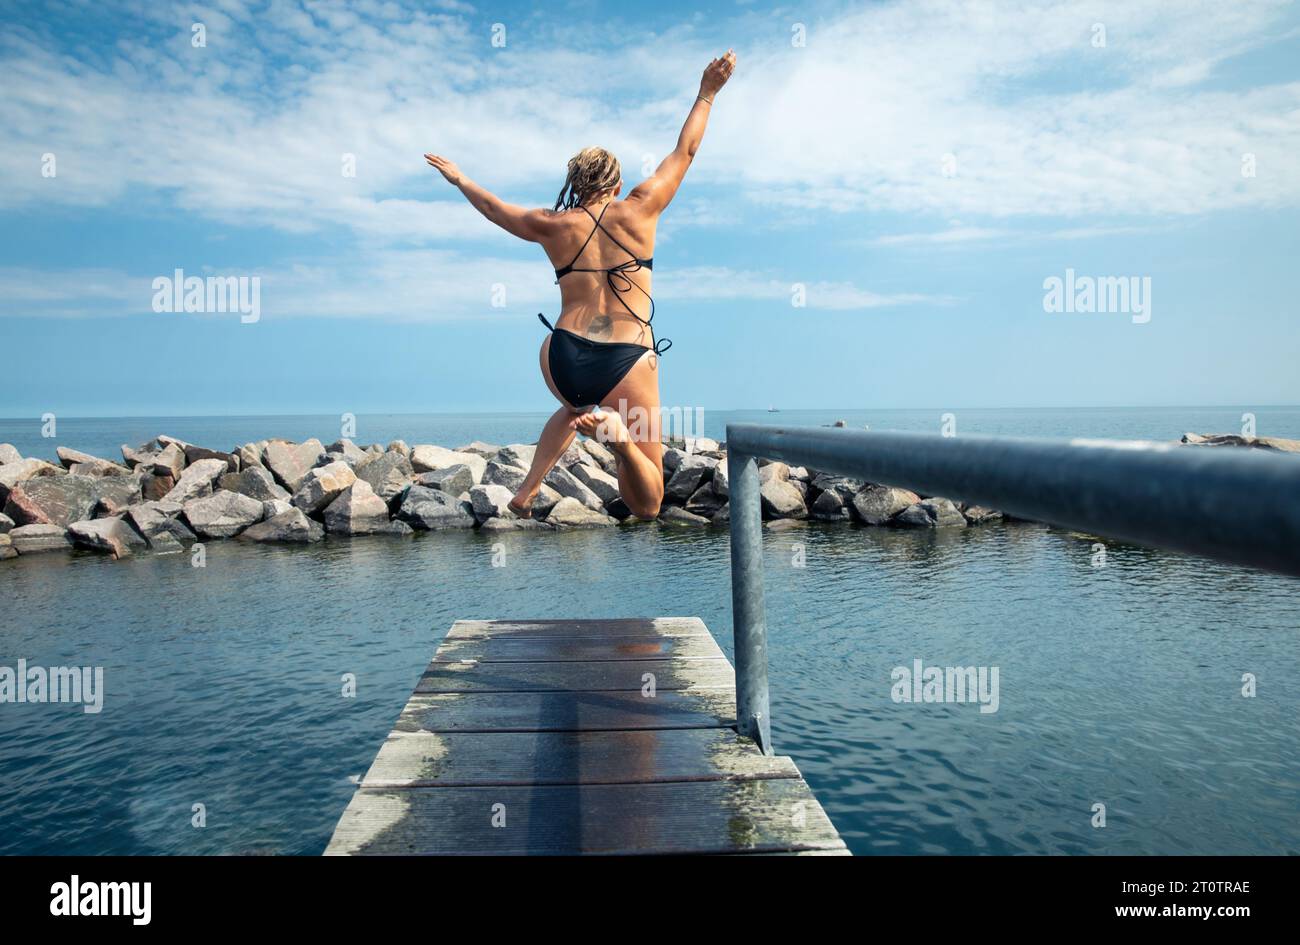 Woman With Arms and Legs In The Air Jumping Into Ocean In Denmark Stock Photo